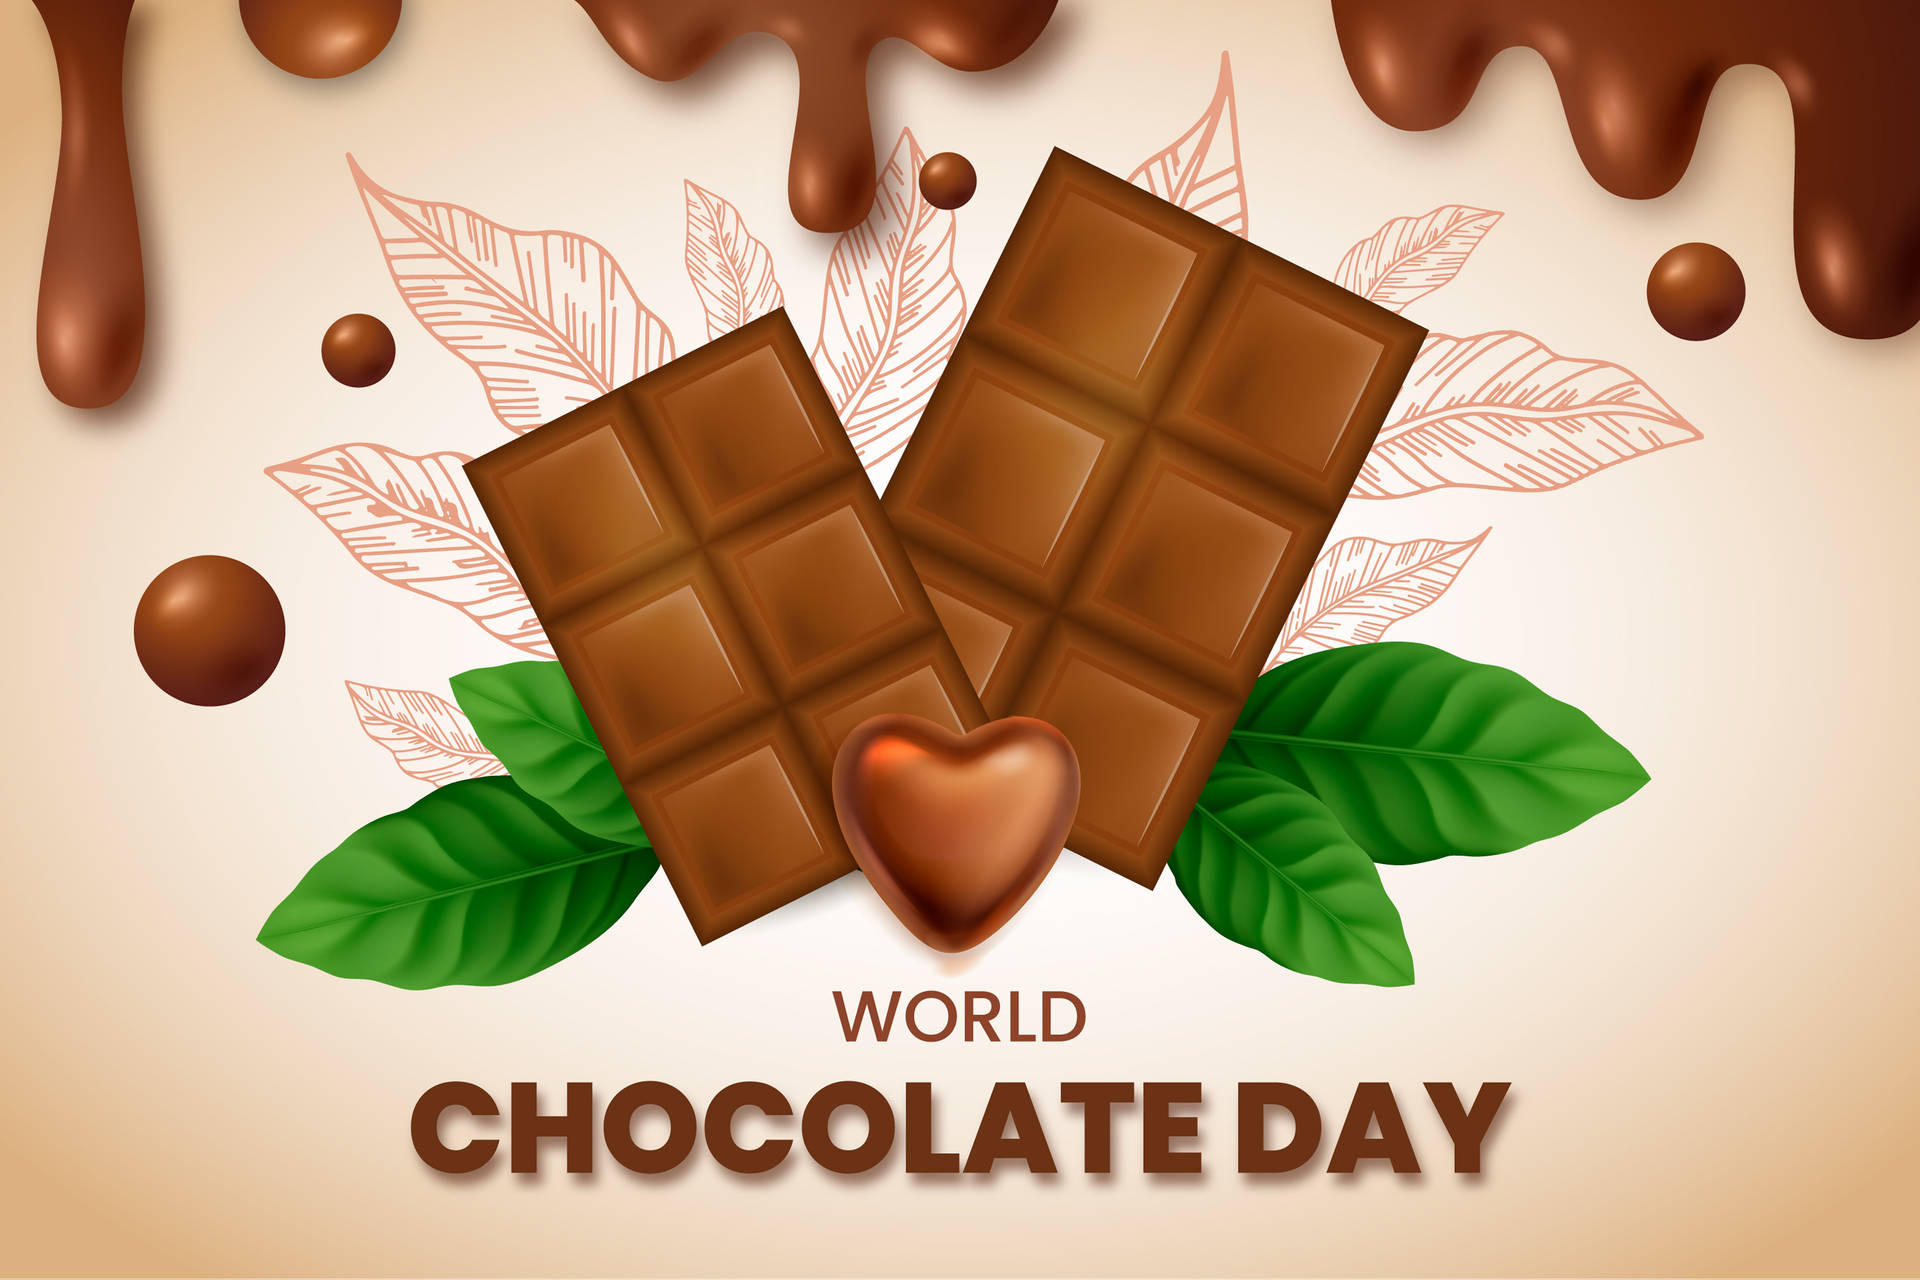 World Chocolate Day Poster Wallpaper